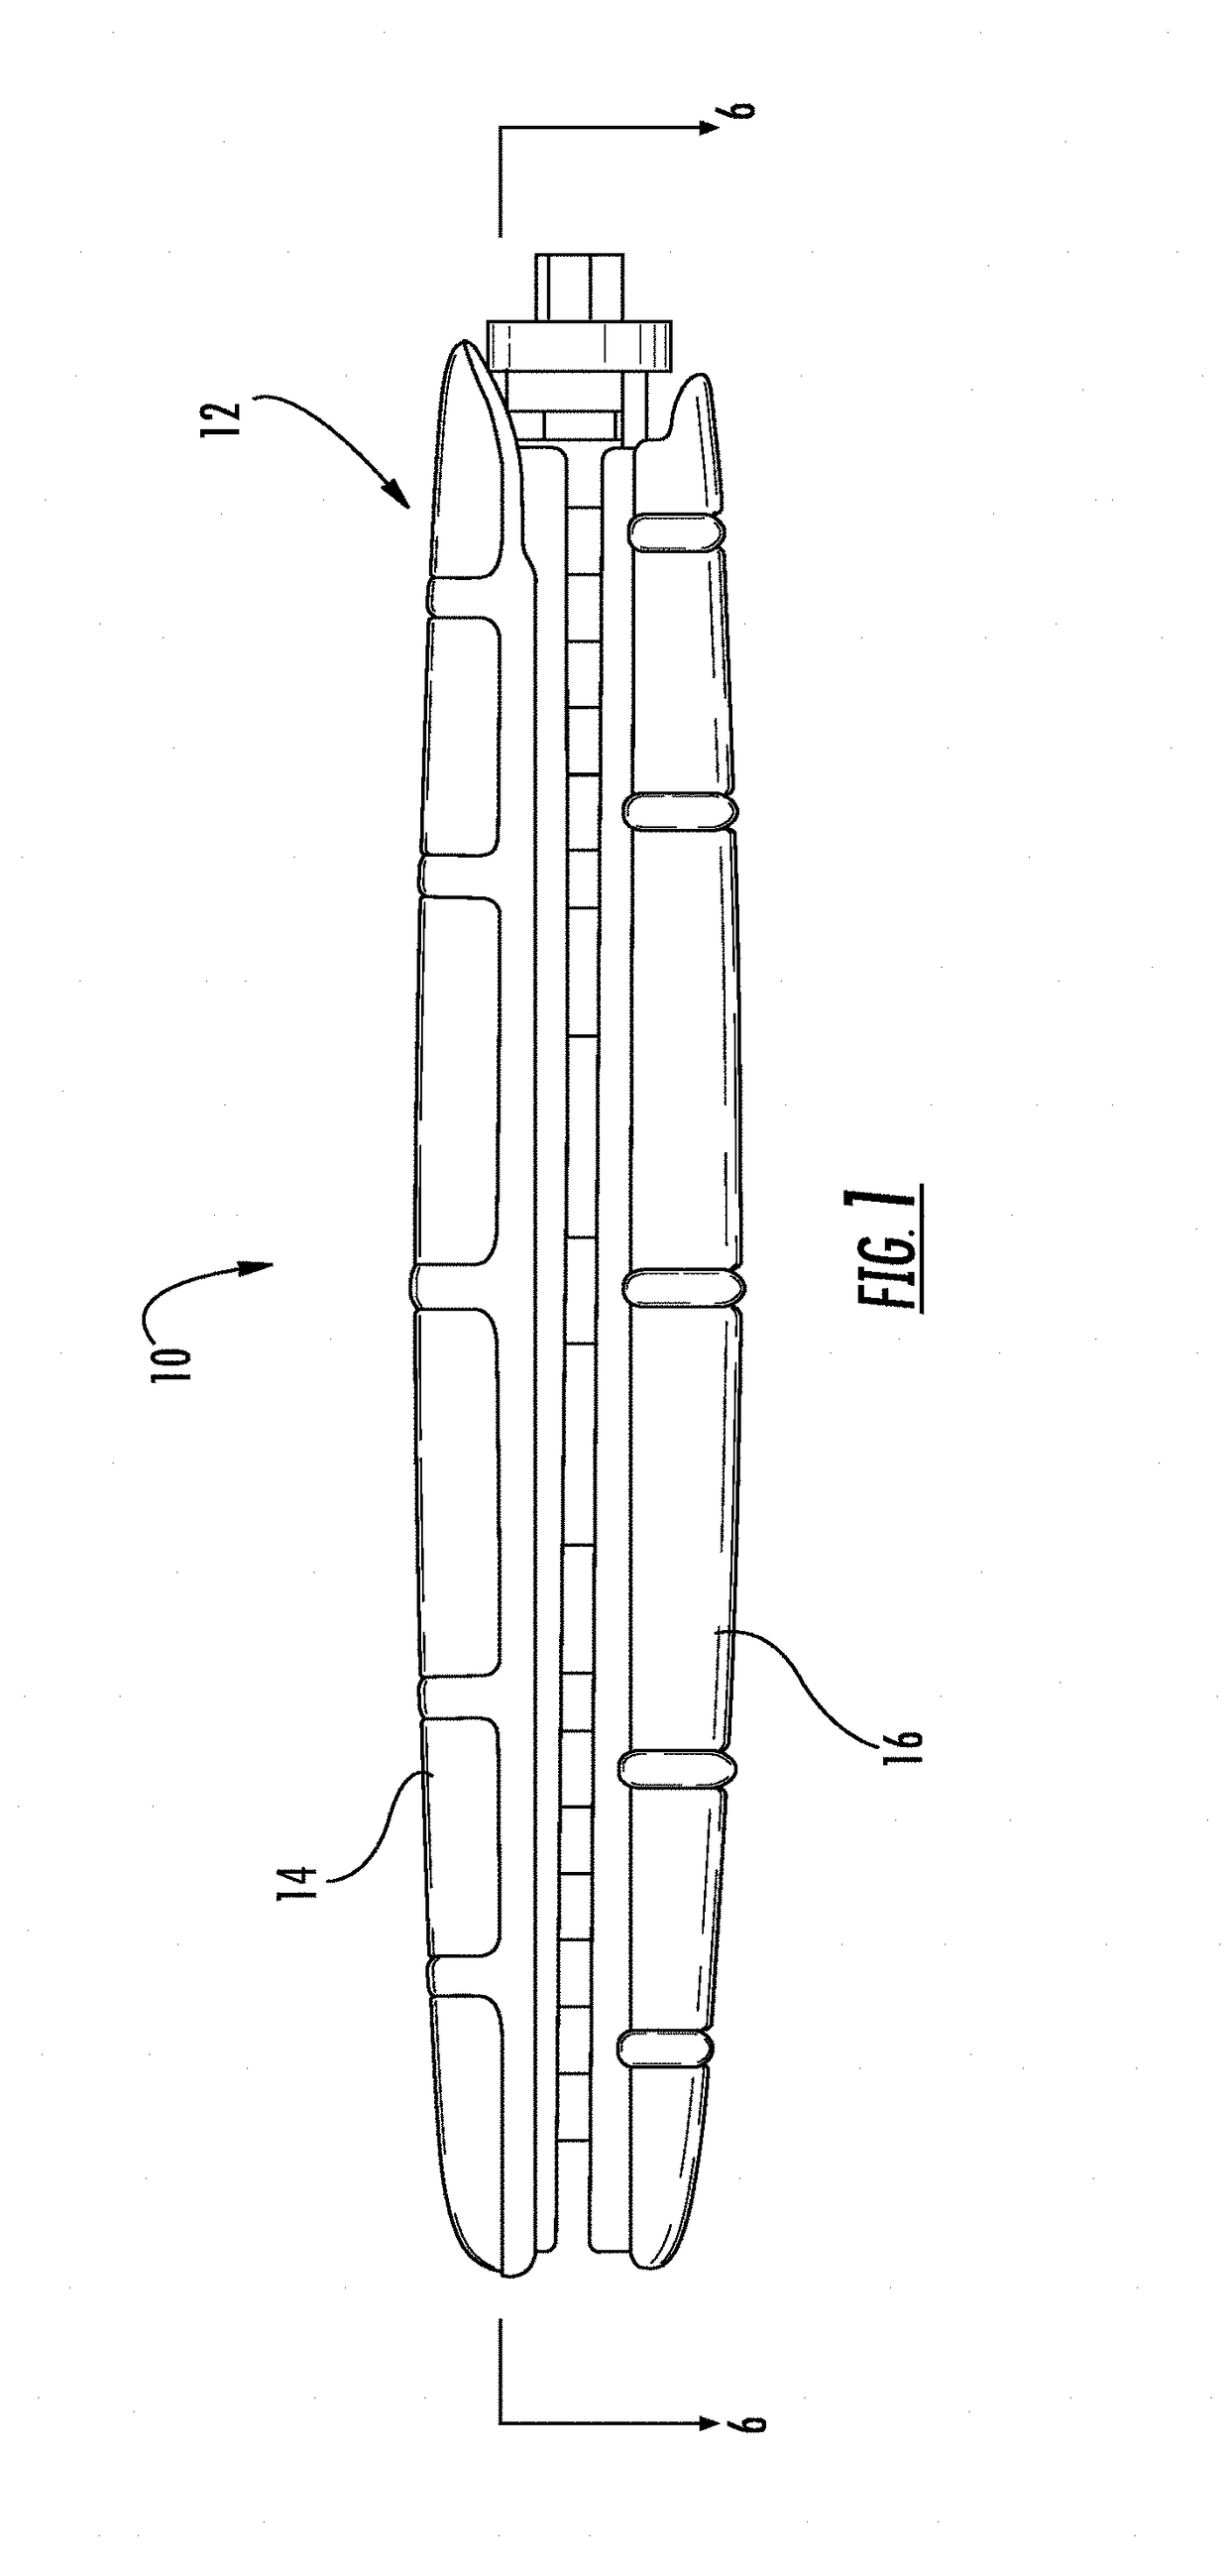 Surgical operating instrument for expandable and adjustable lordosis interbody fusion systems